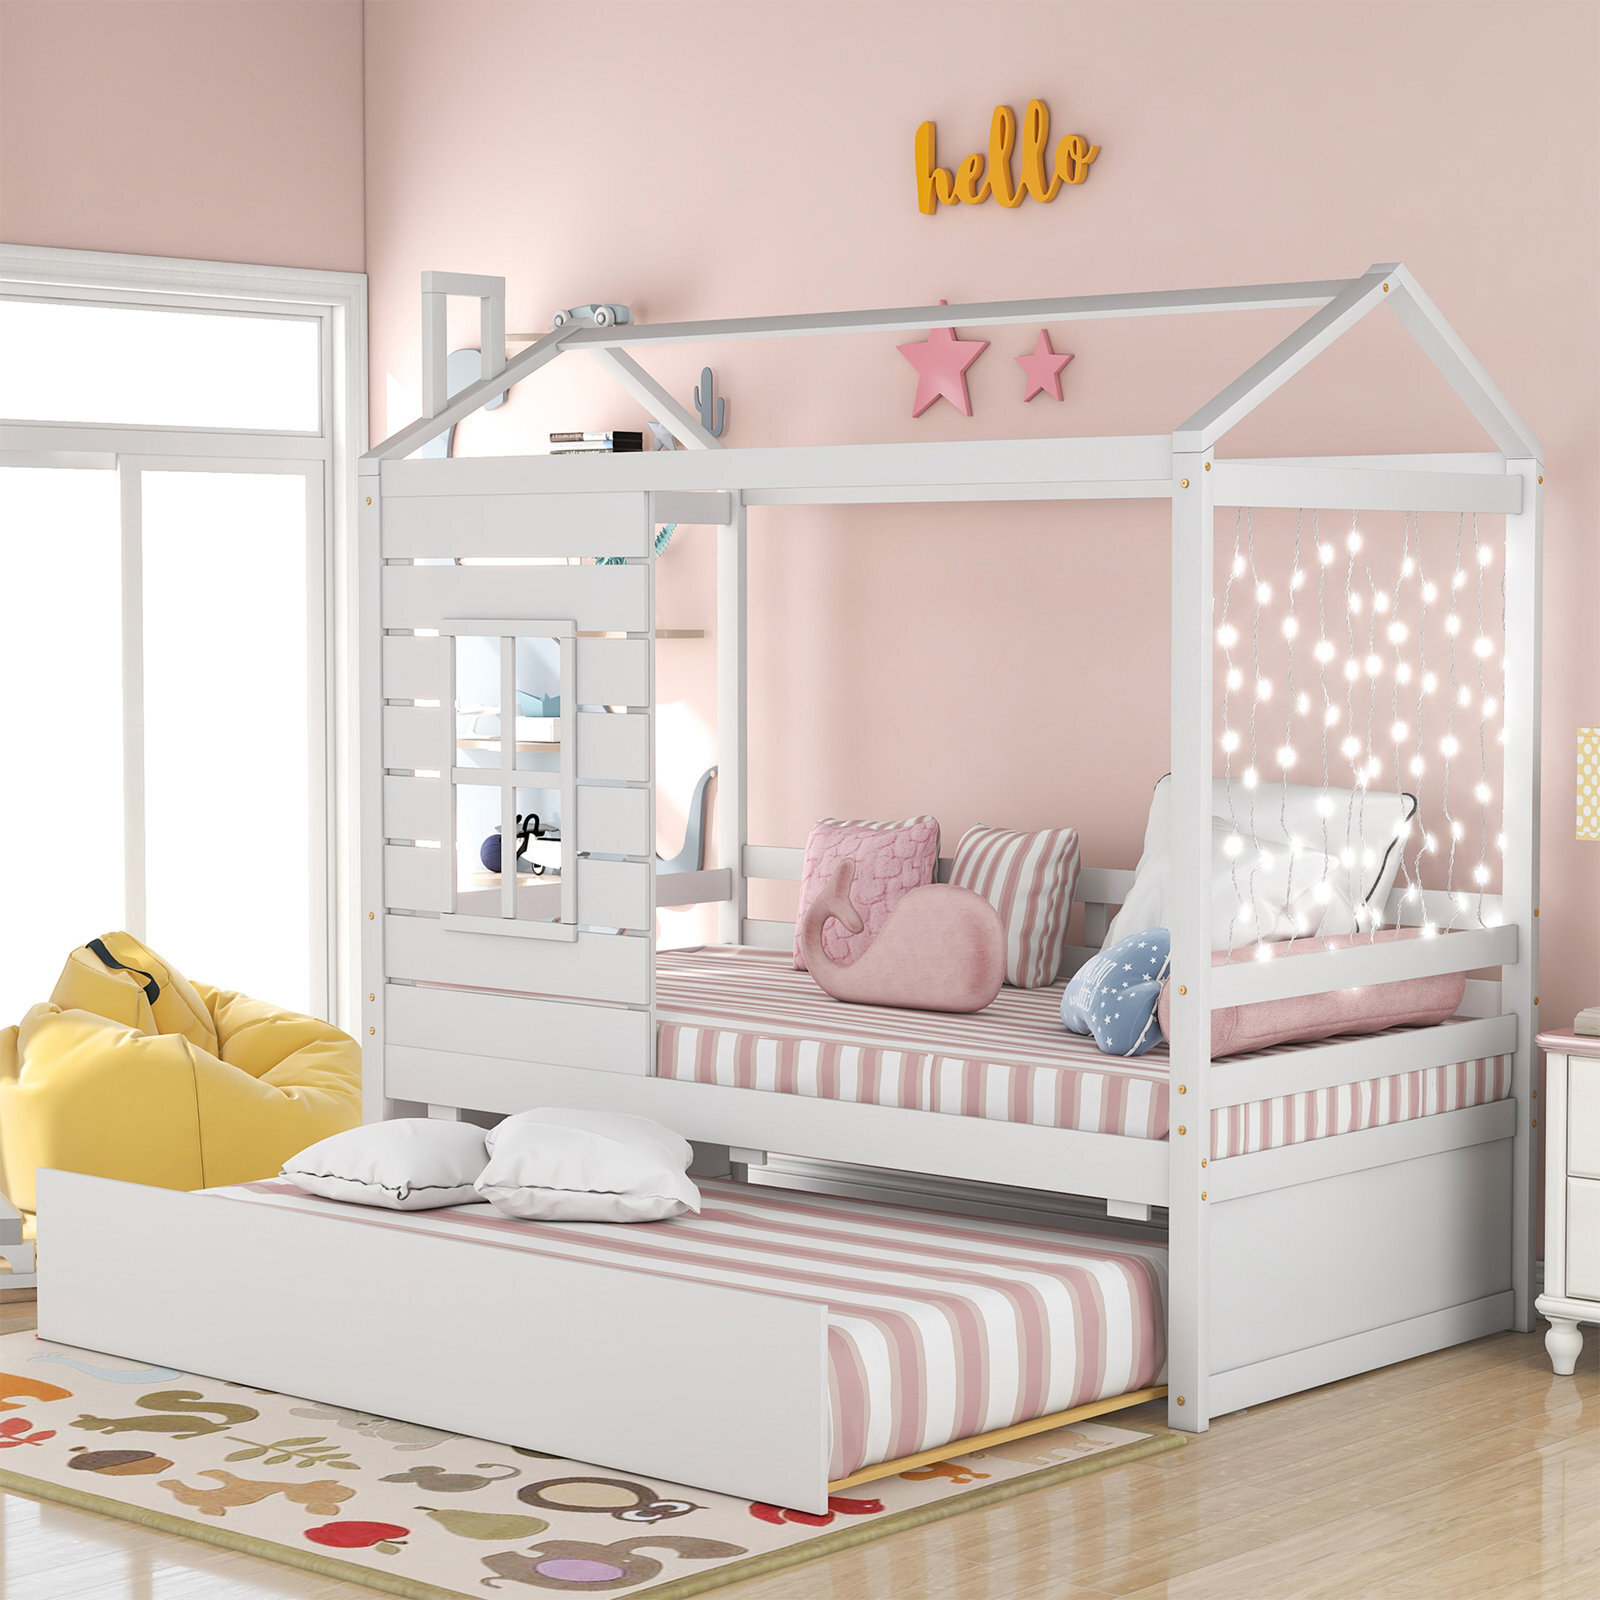 Children’s House Shaped Canopy Daybed With Trundle